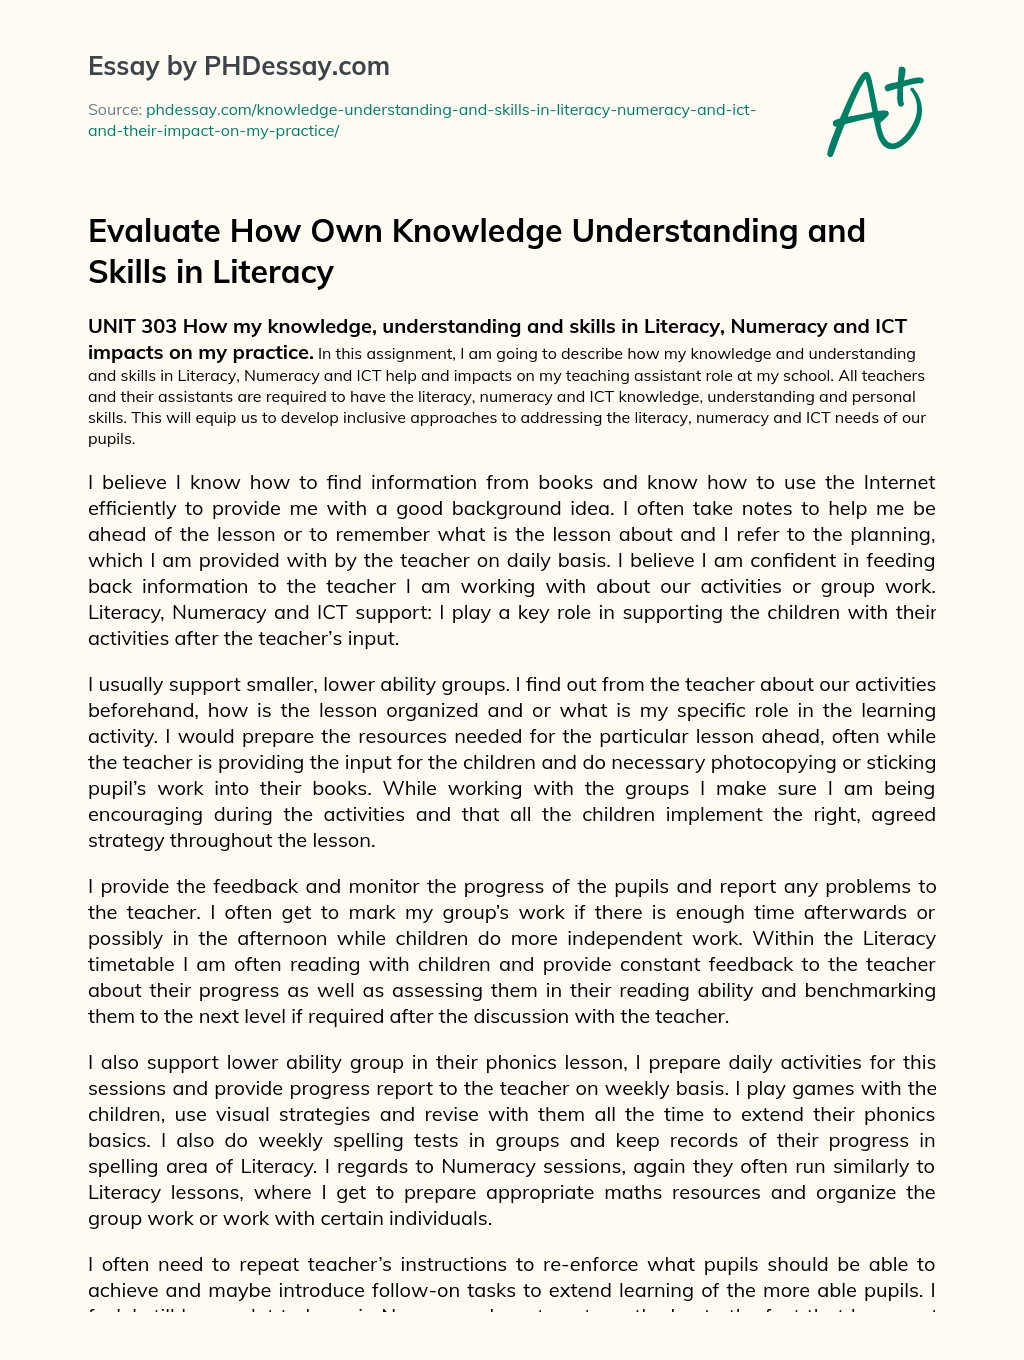 Evaluating Own Knowledge Understanding and Skills in Literacy essay